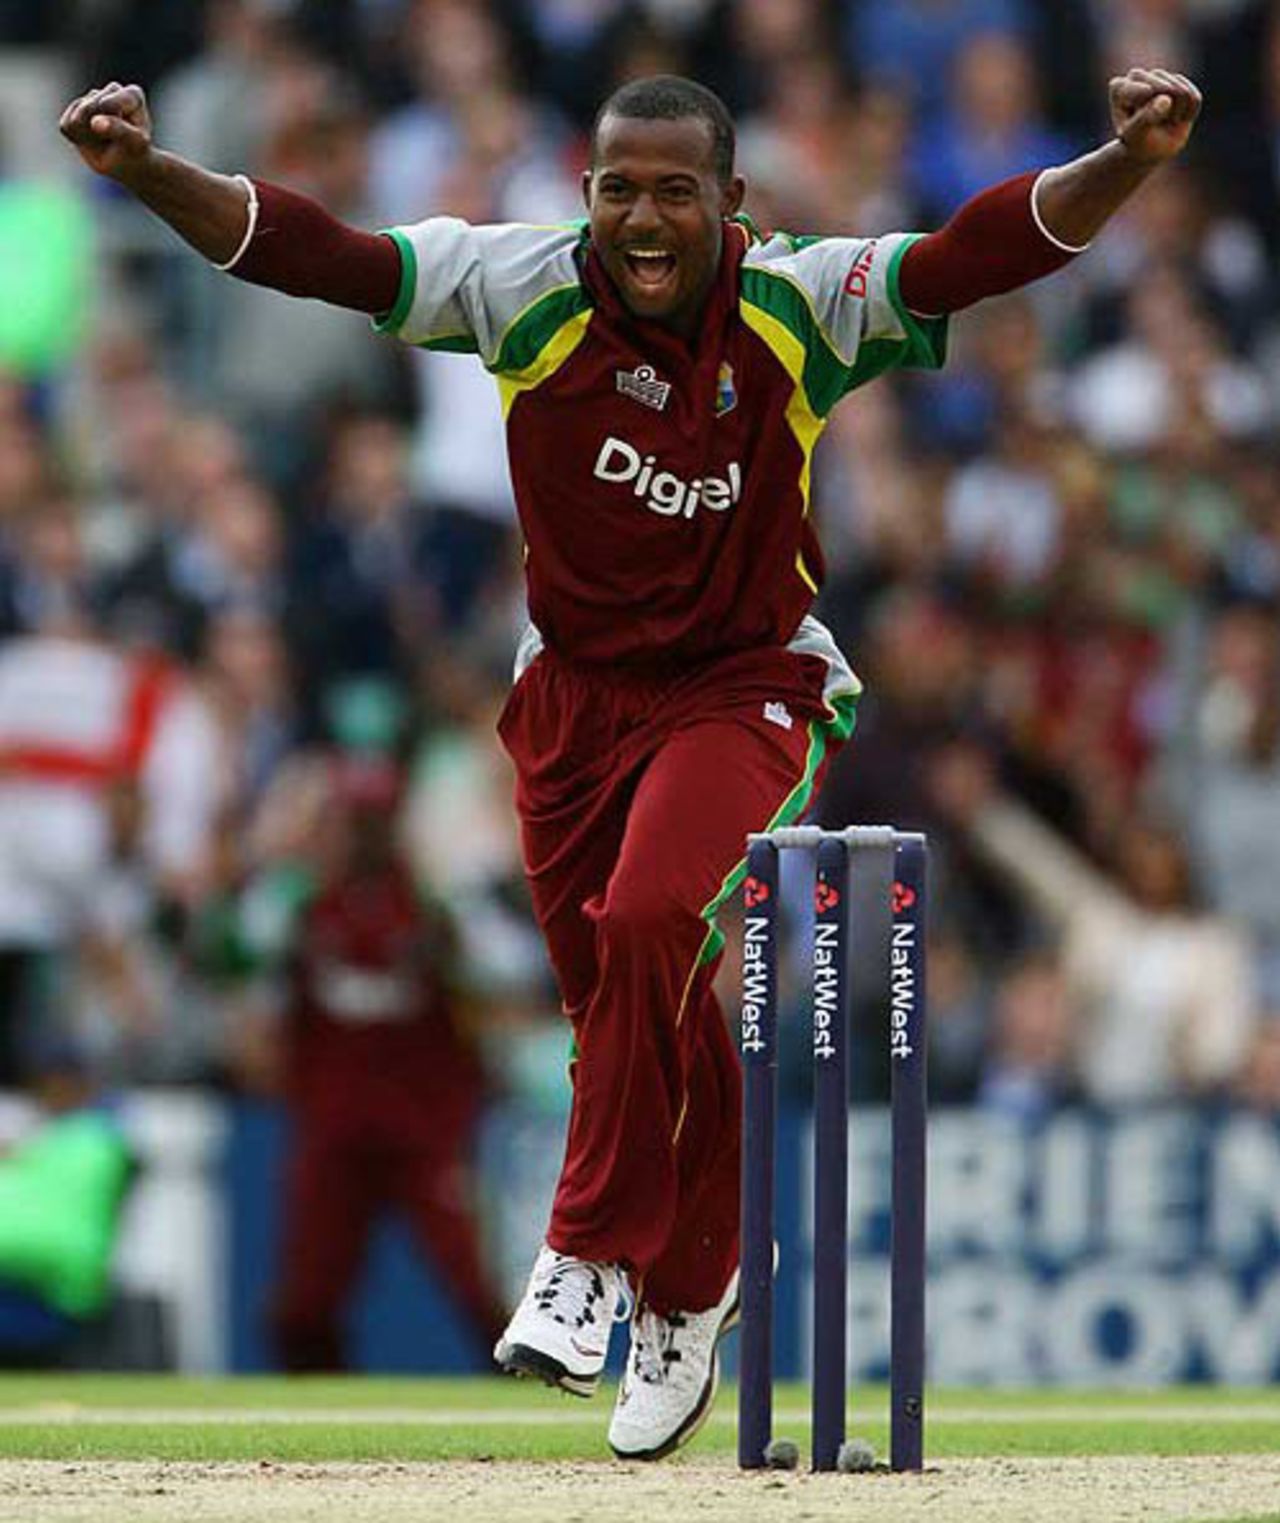 Dwayne Smith celebrates the wicket of Alastair Cook, England v West Indies, Twenty20, The Oval, June 28, 2007